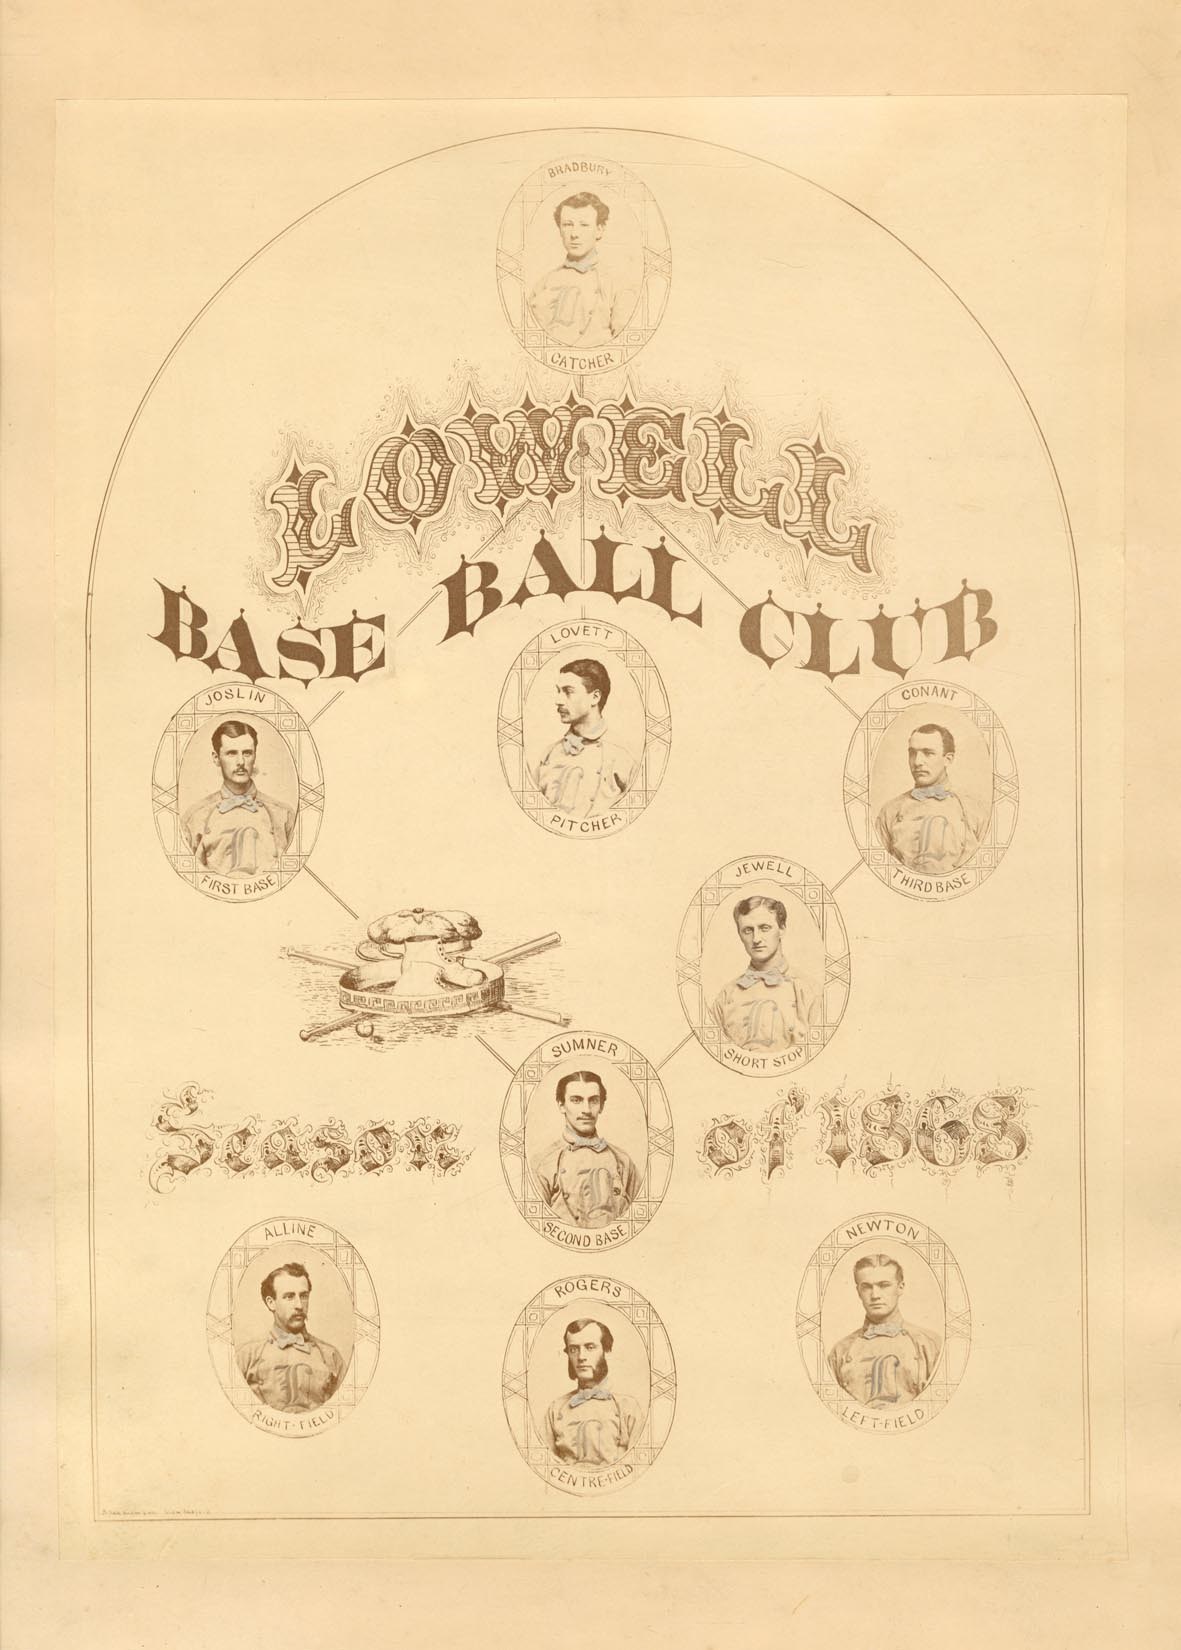 - Important 1868 Lowell Base Ball Club Imperial Cabinet